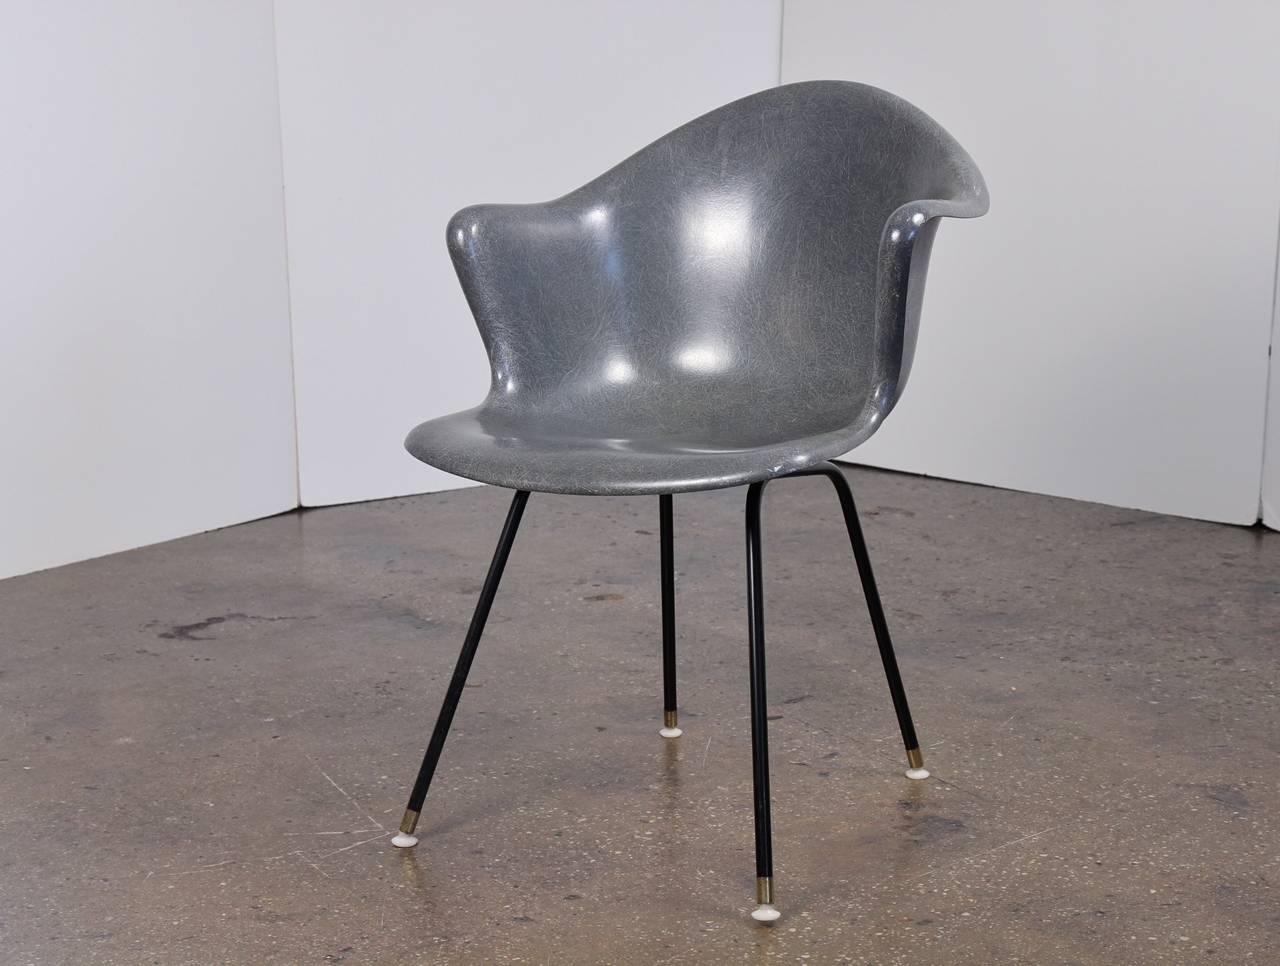 Vintage Eames-era armchair shows off a beautiful thready fiberglass shell in deep gray. Reminiscent of an Eames chair, but with its own twist. Curved edge adds elegance. Made by Cole Steel. 1960s. In excellent vintage condition.

We have two of